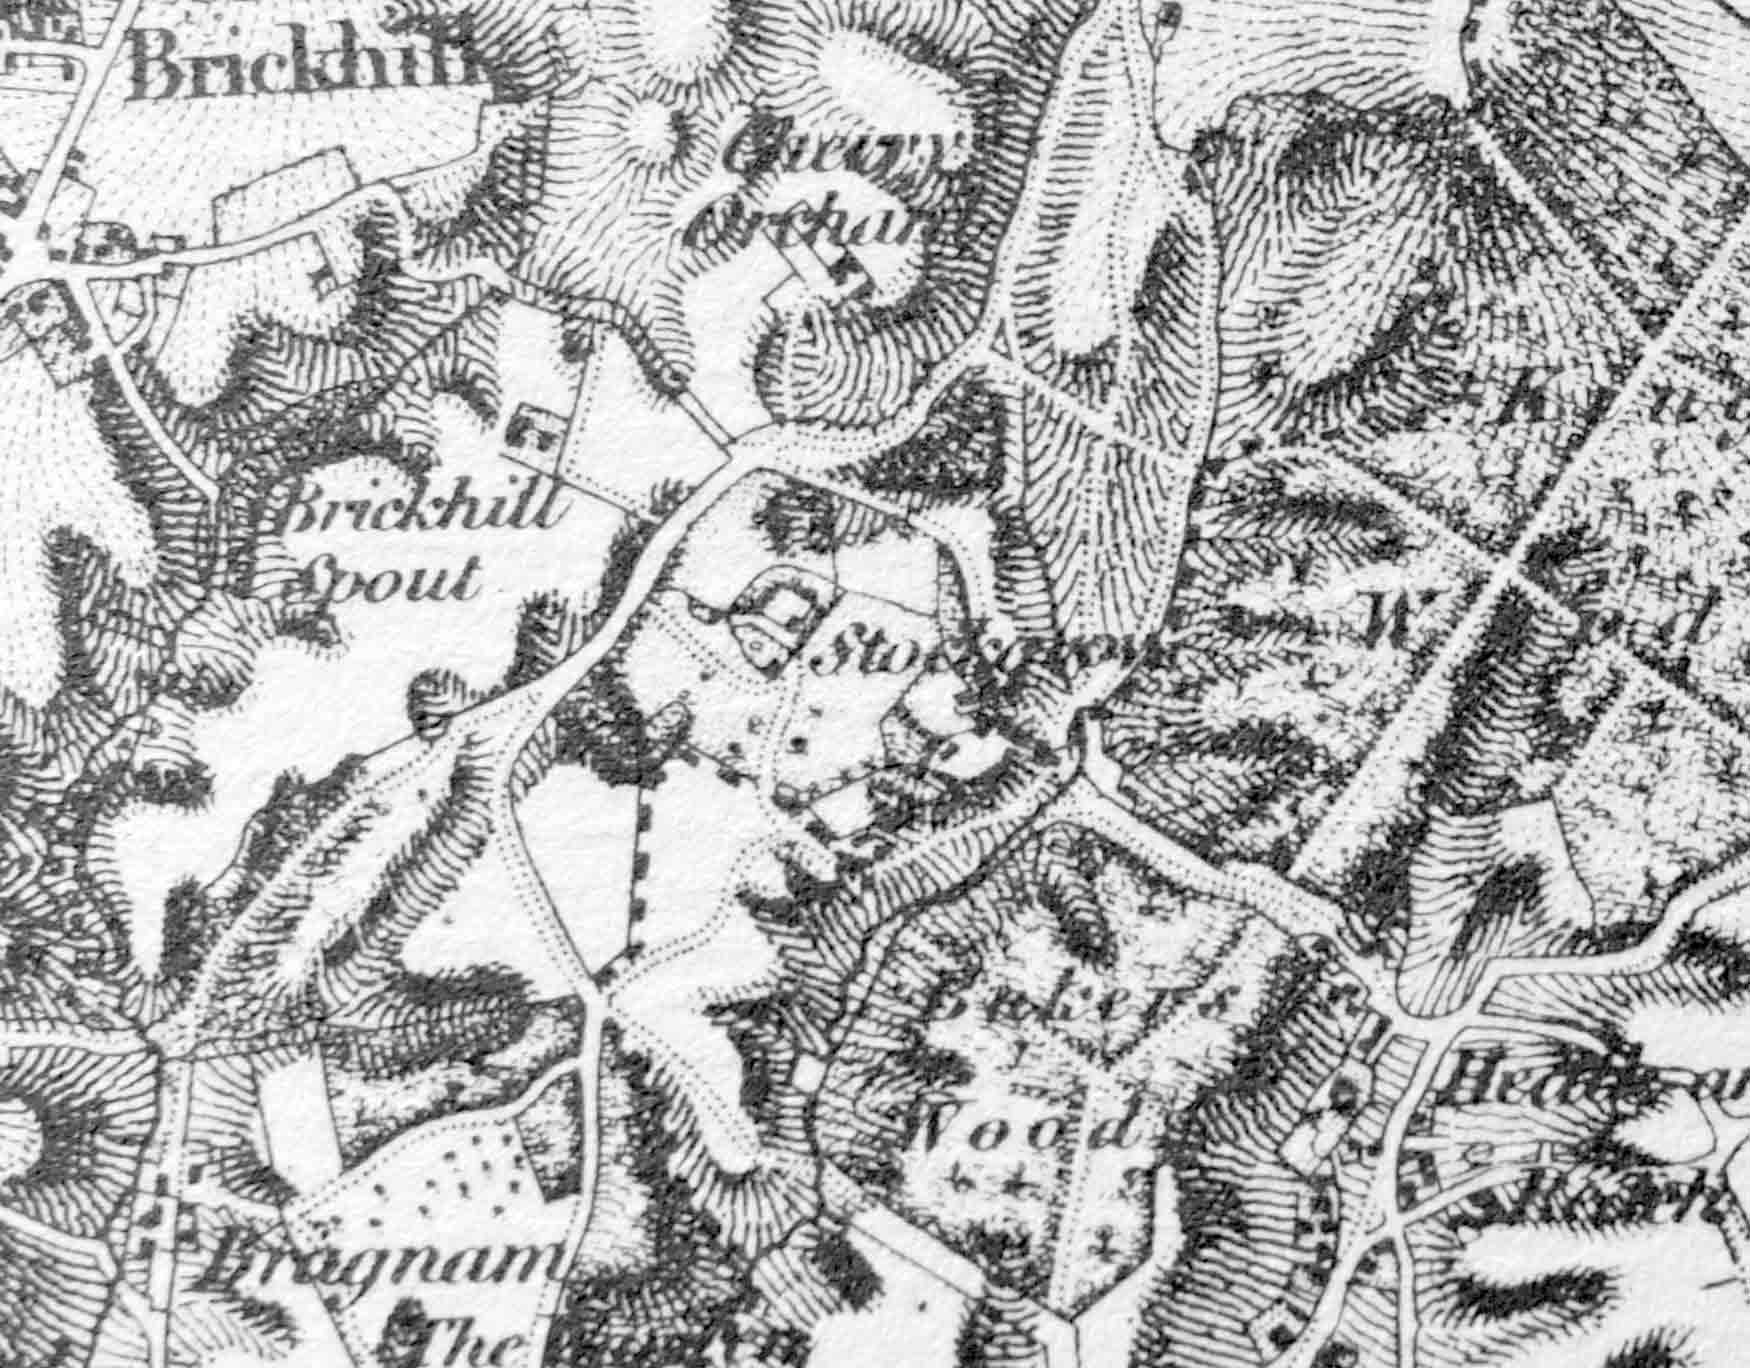 Stockgrove map in 1880